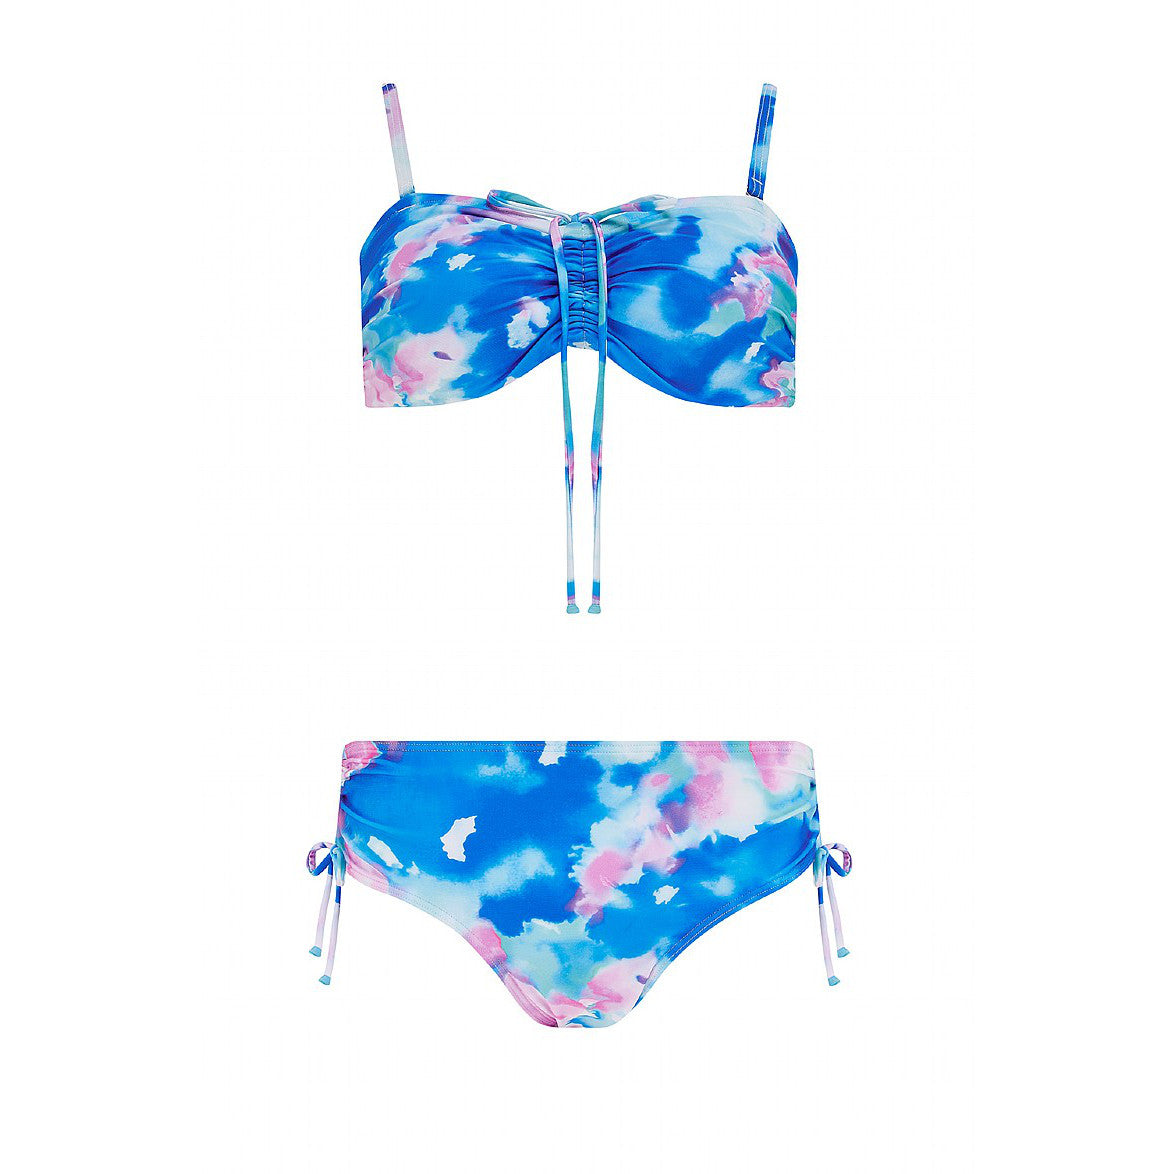 Casablanca Multiway Bikini in a beautiful tie dye print | Swimwear from Nicola Jane | Pocketed mastectomy swimwear for women touched by breast cancer